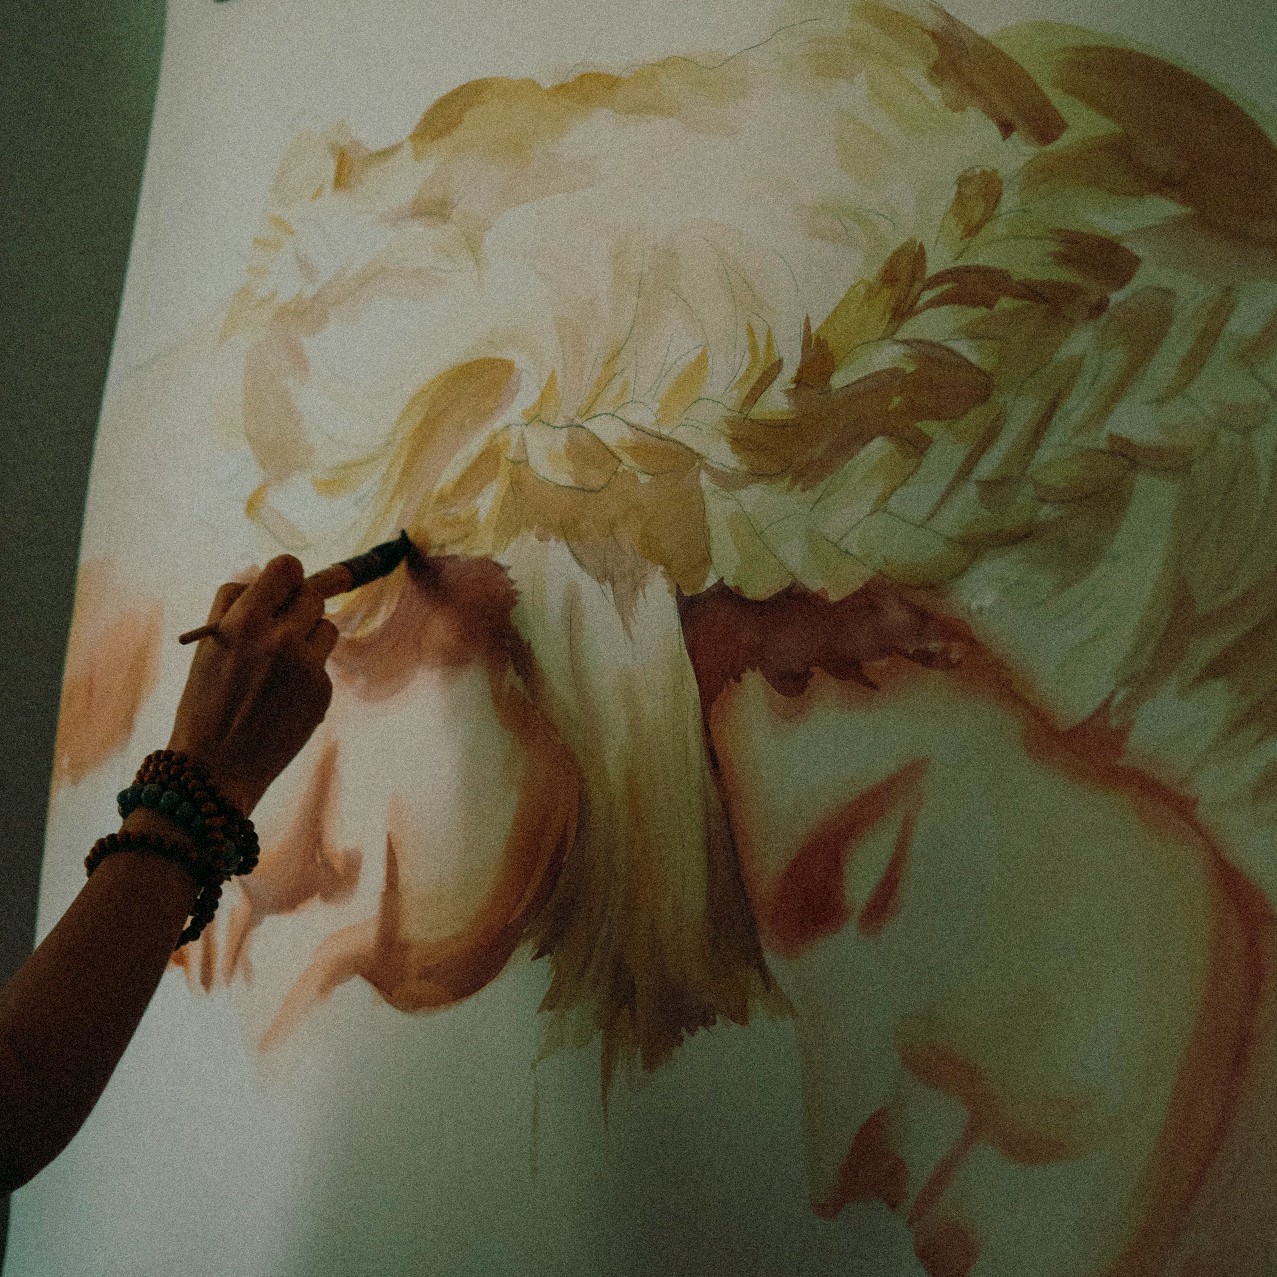 Hand painting an image with two heads.